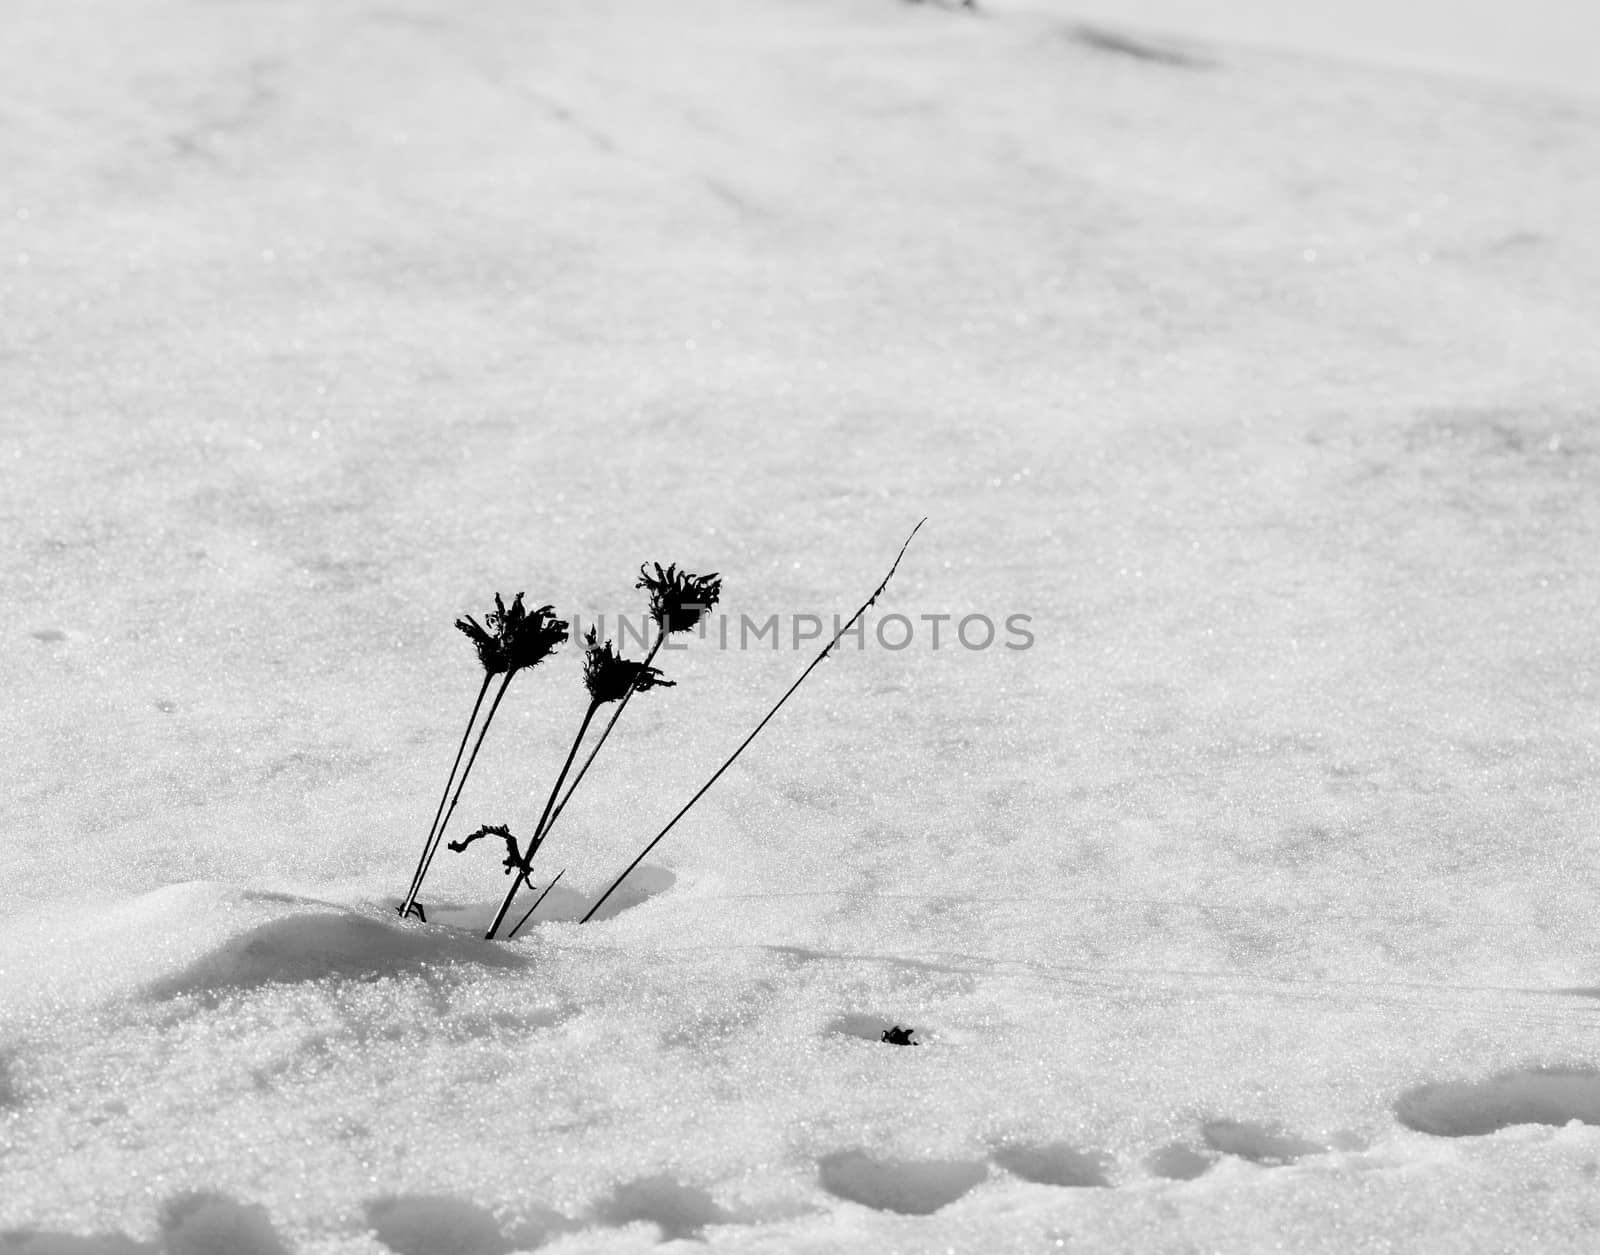 Dry flowers in the snow